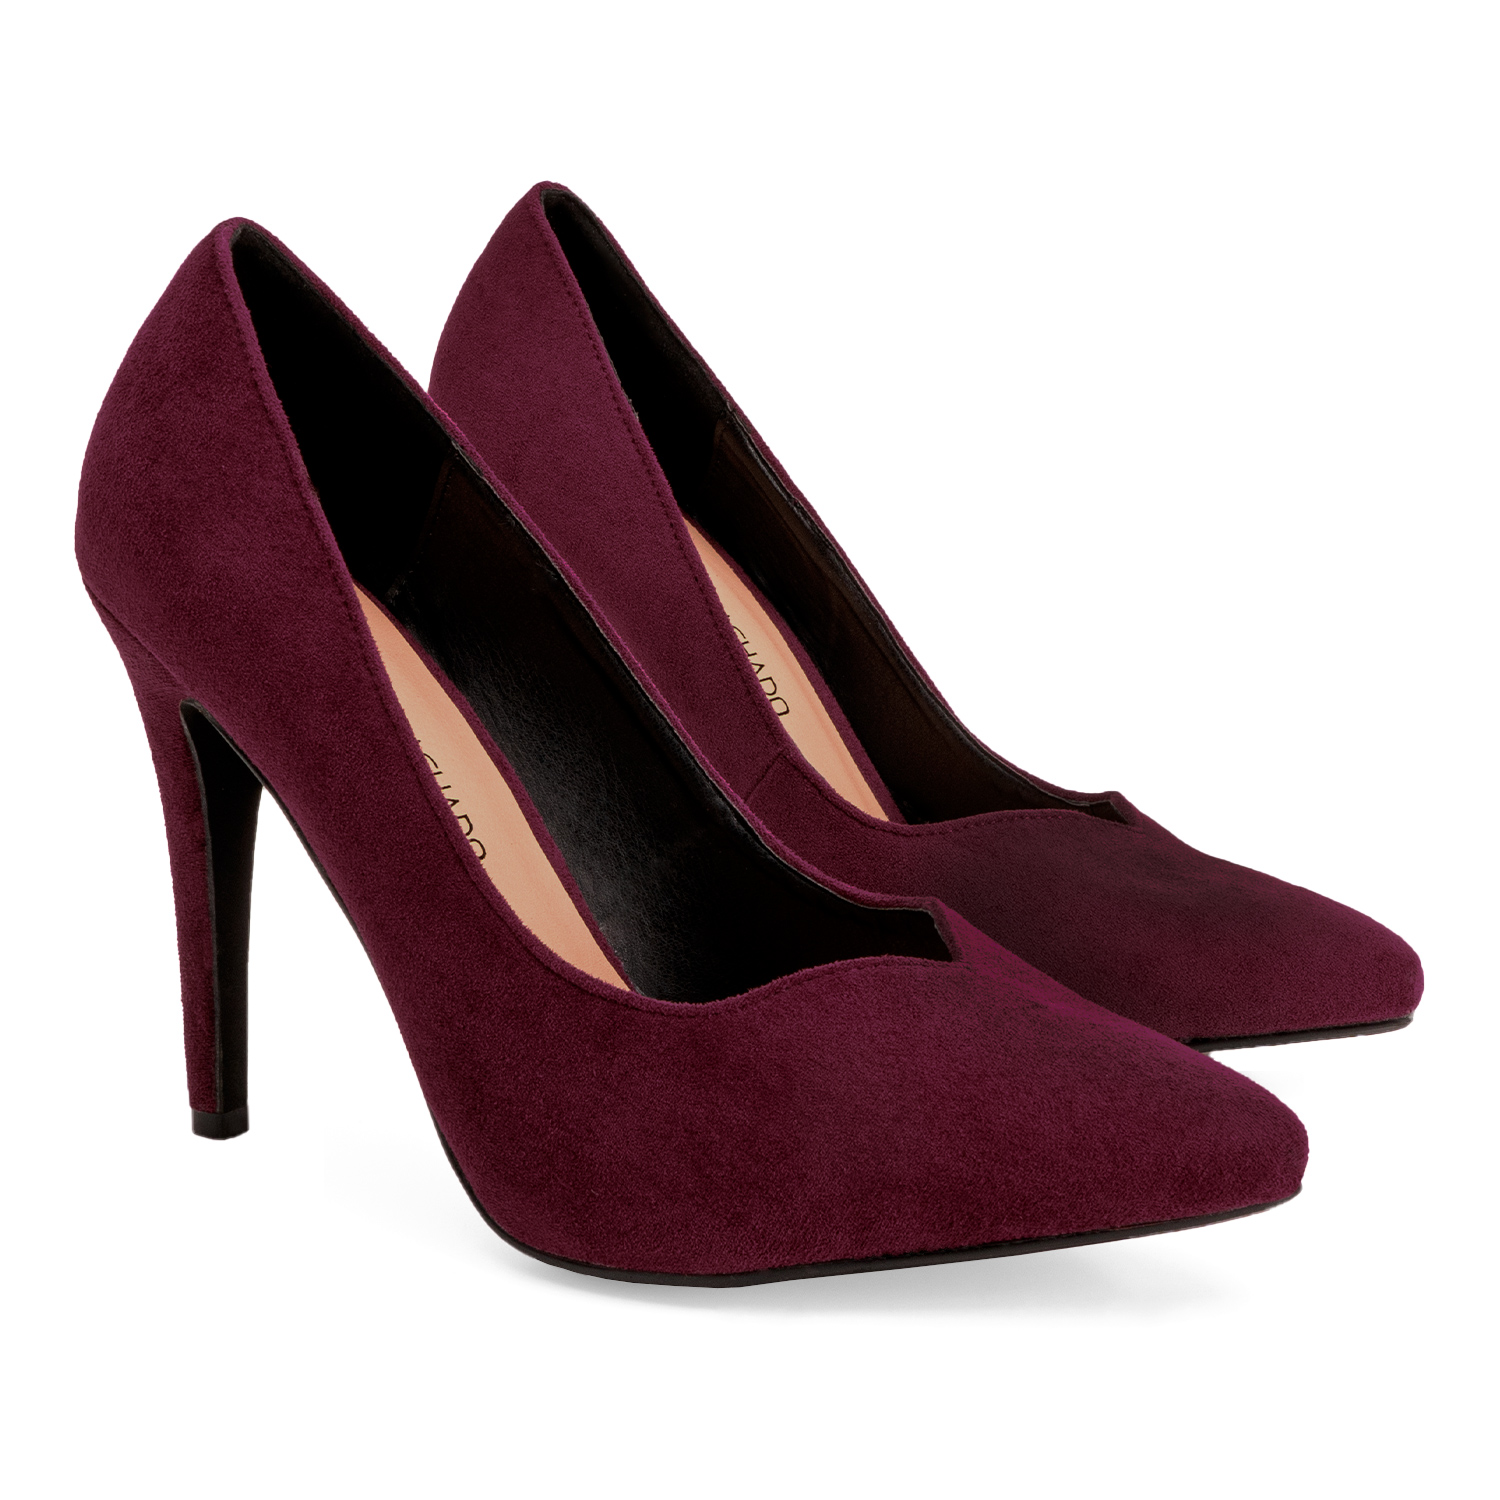 Heeled shoes in bordeaux faux suede 